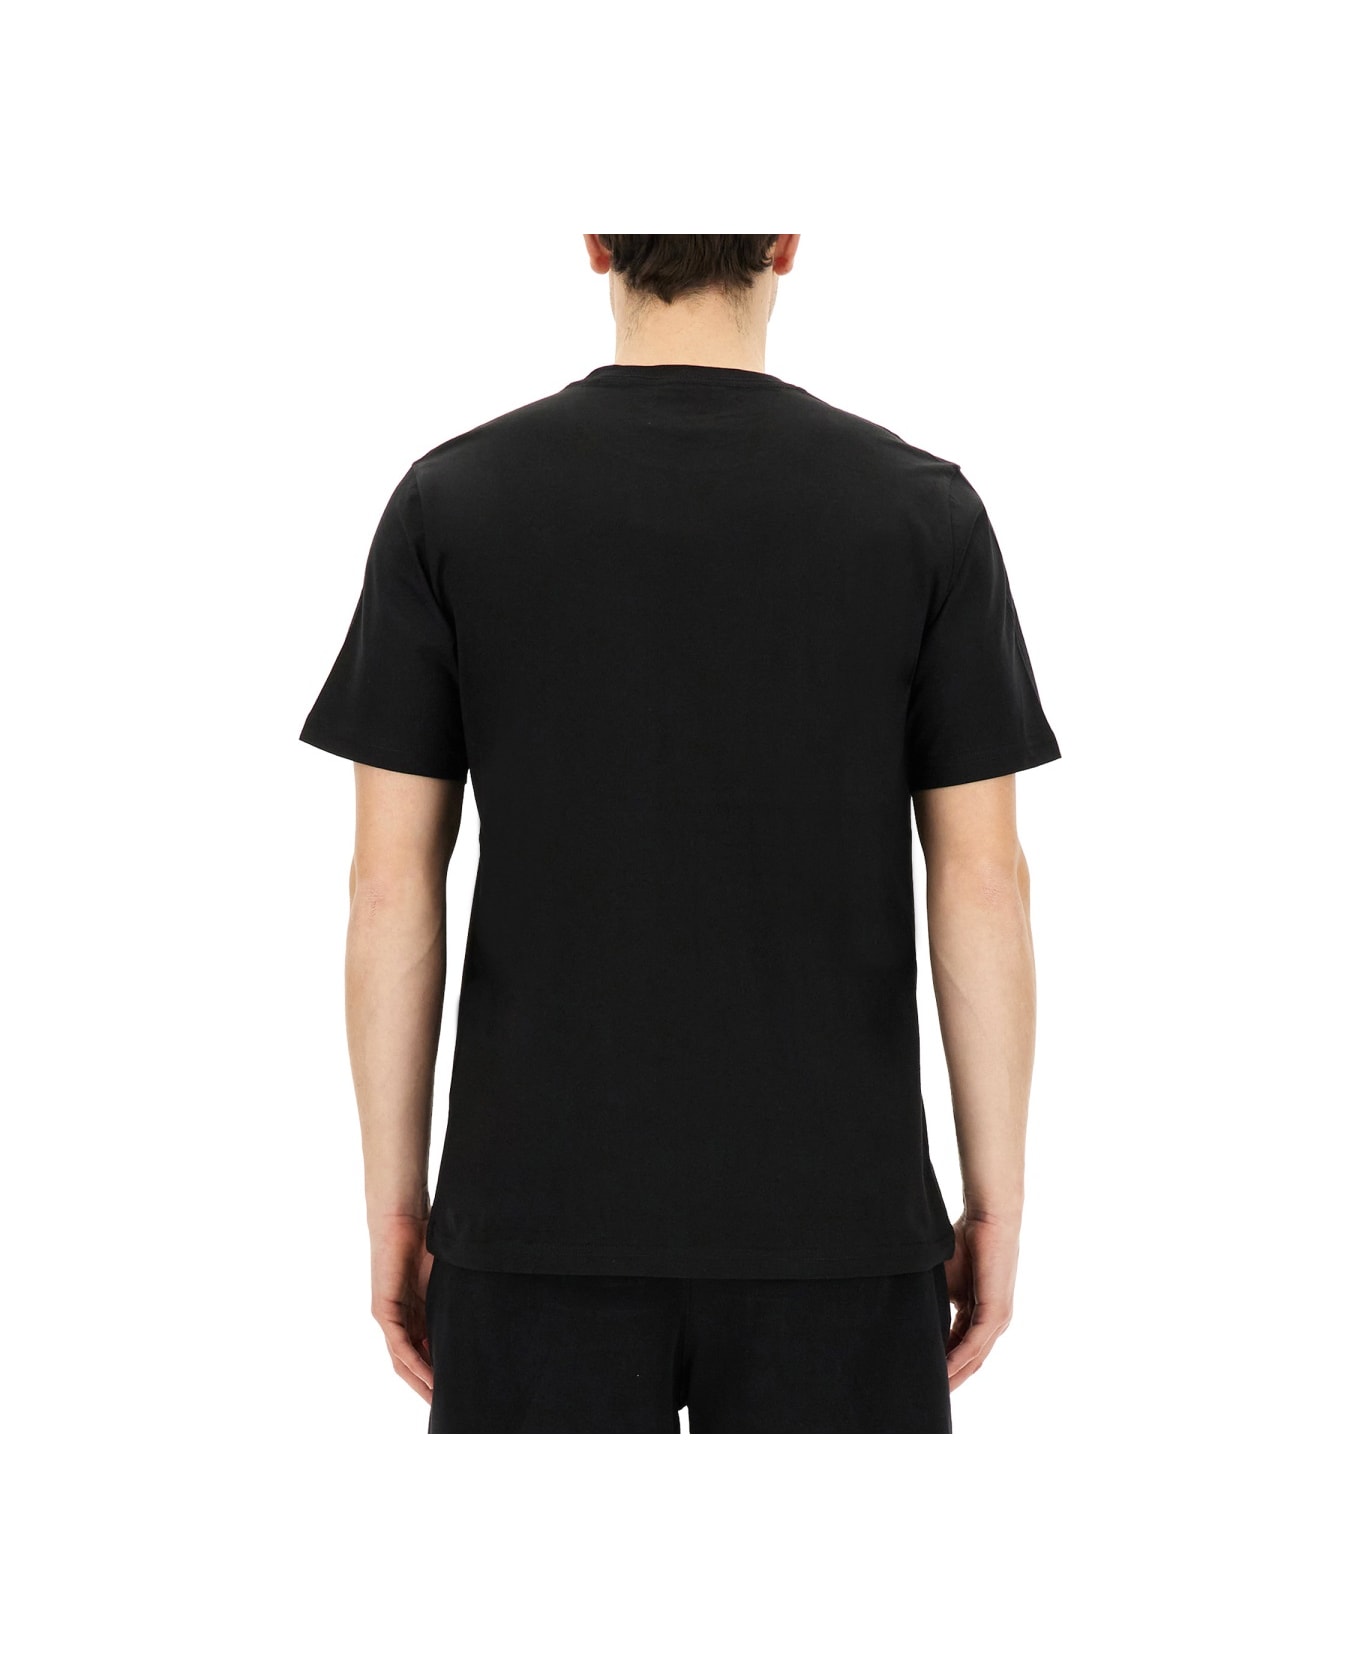 PS by Paul Smith Regular Fit T-shirt - BLACK シャツ